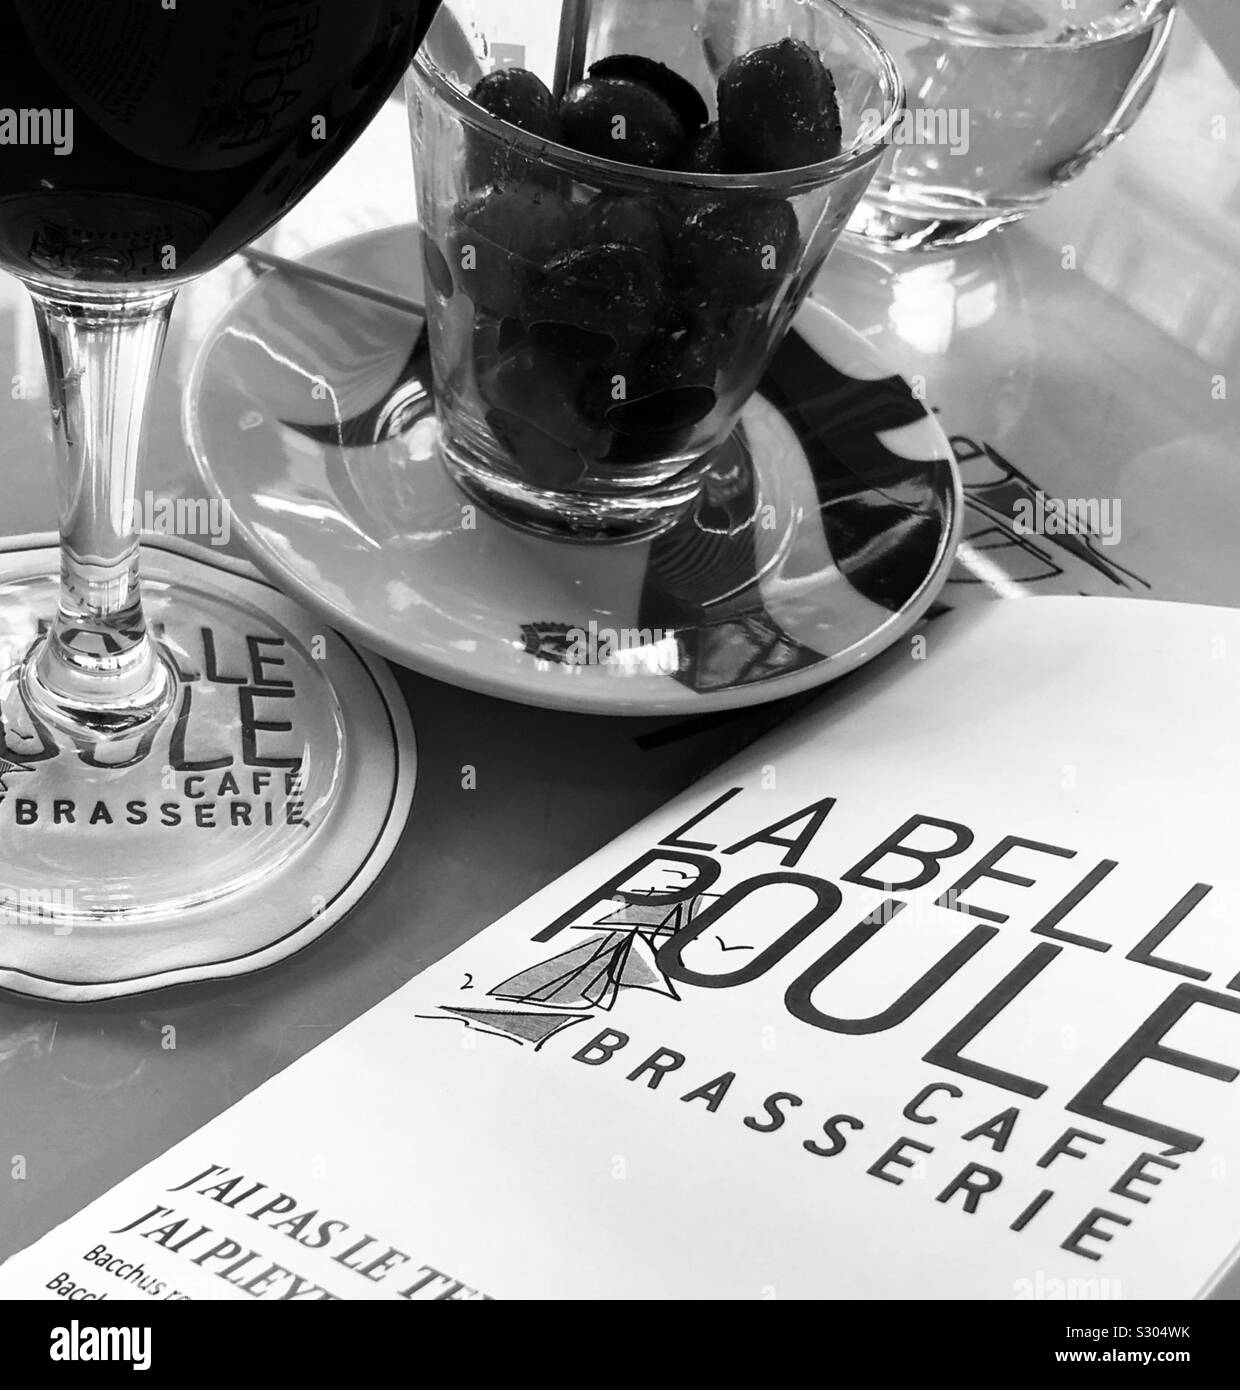 Olives, a glass of wine and menu on the table at Brasserie La Belle Poule in the 8th arrondissement in Paris, France.  Black and white photo. Stock Photo